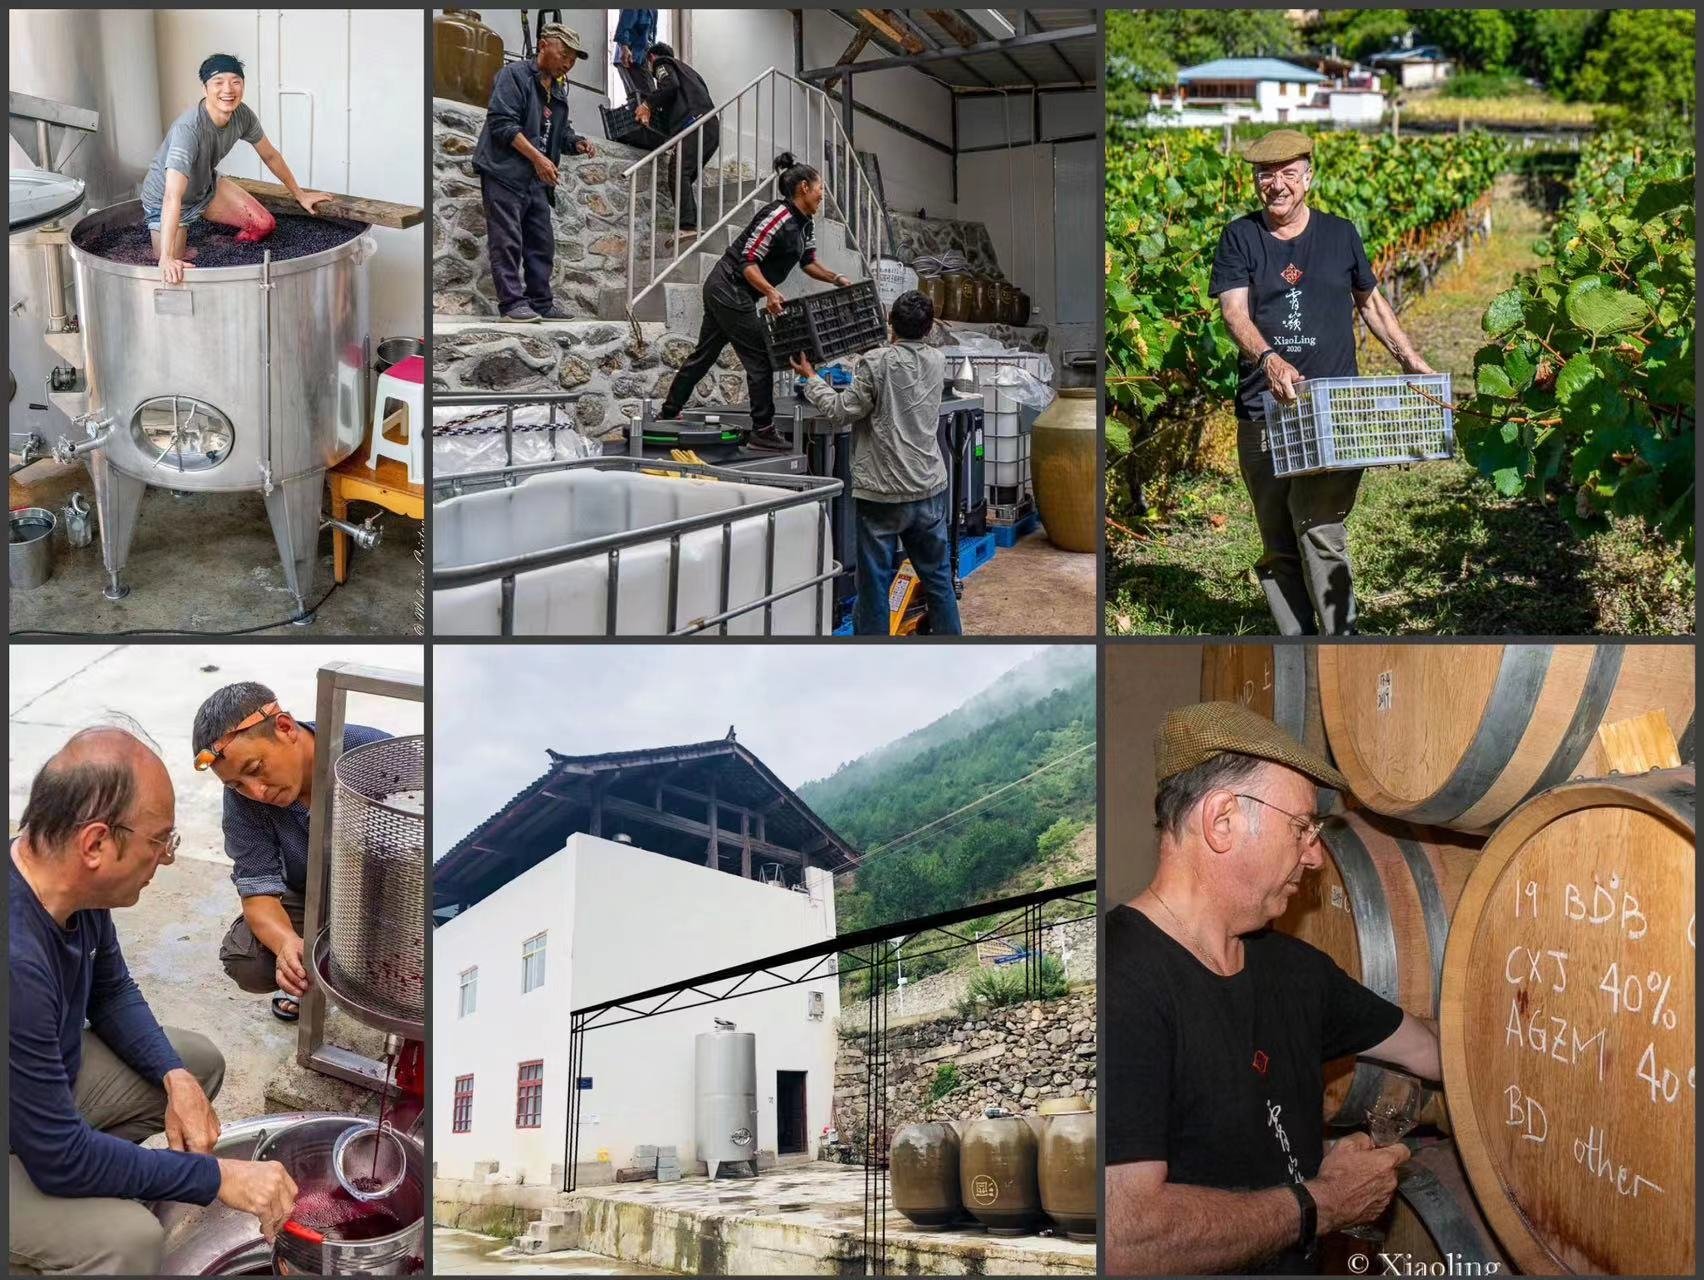 Bertrand Cristau: Some more photos from the process of winemaking.